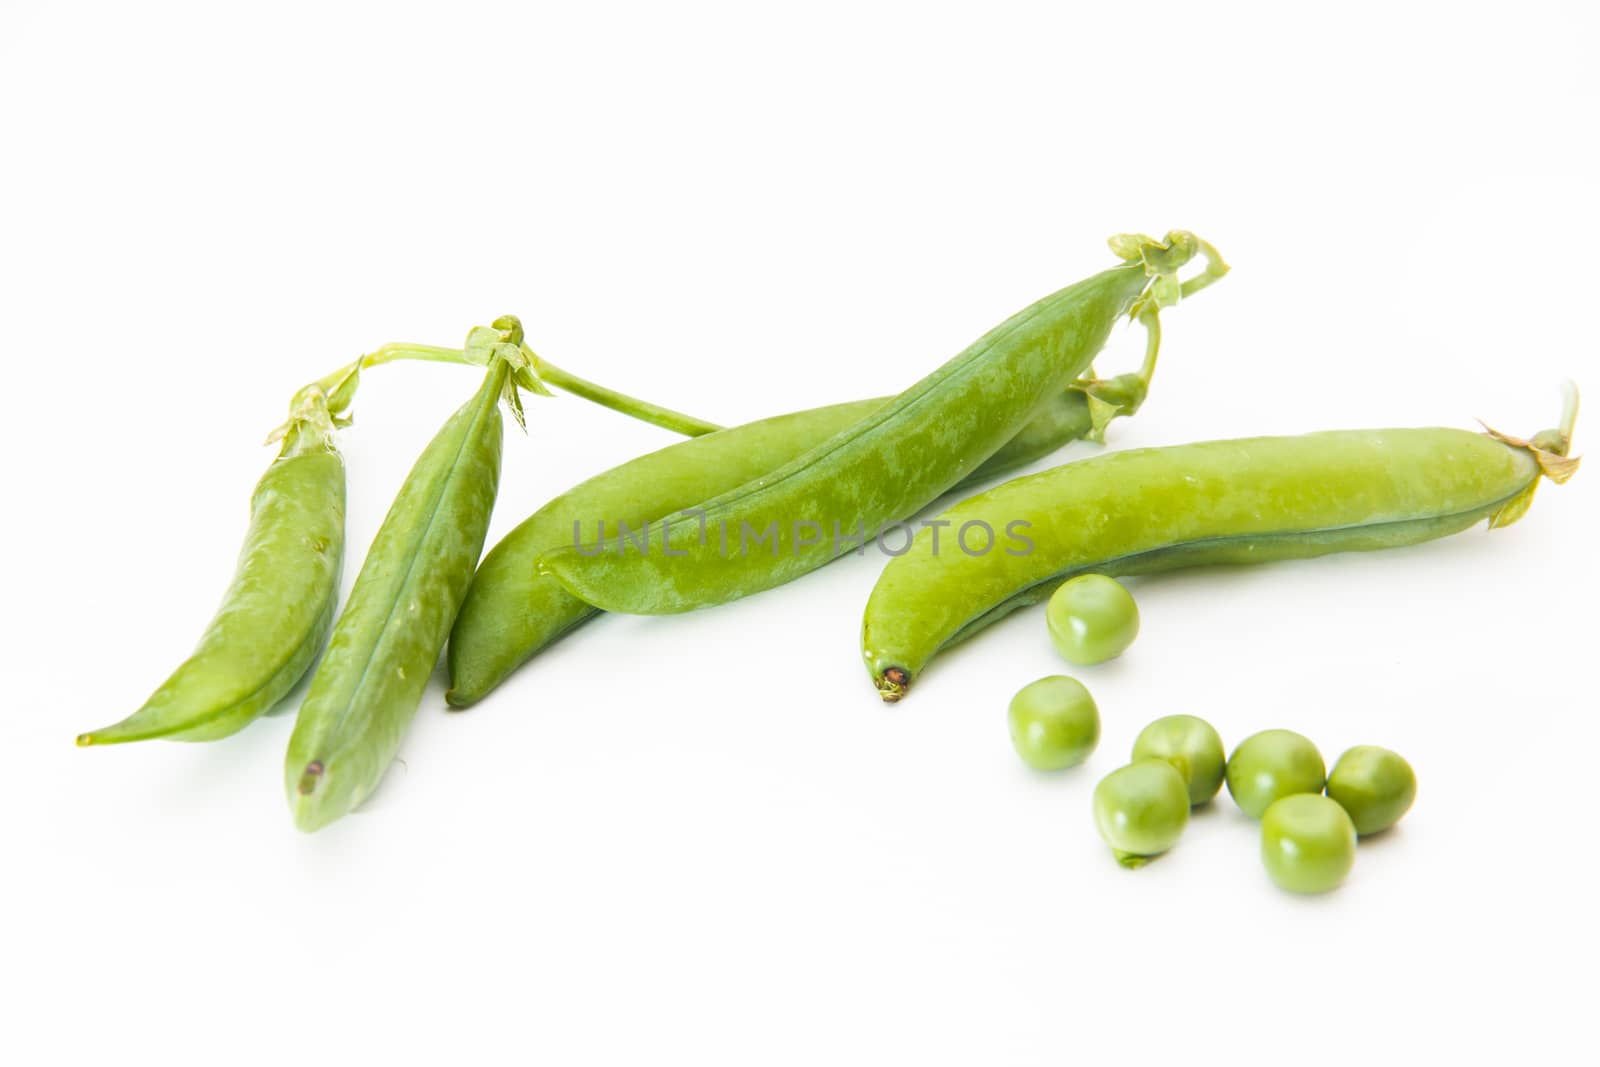 Peas by spafra